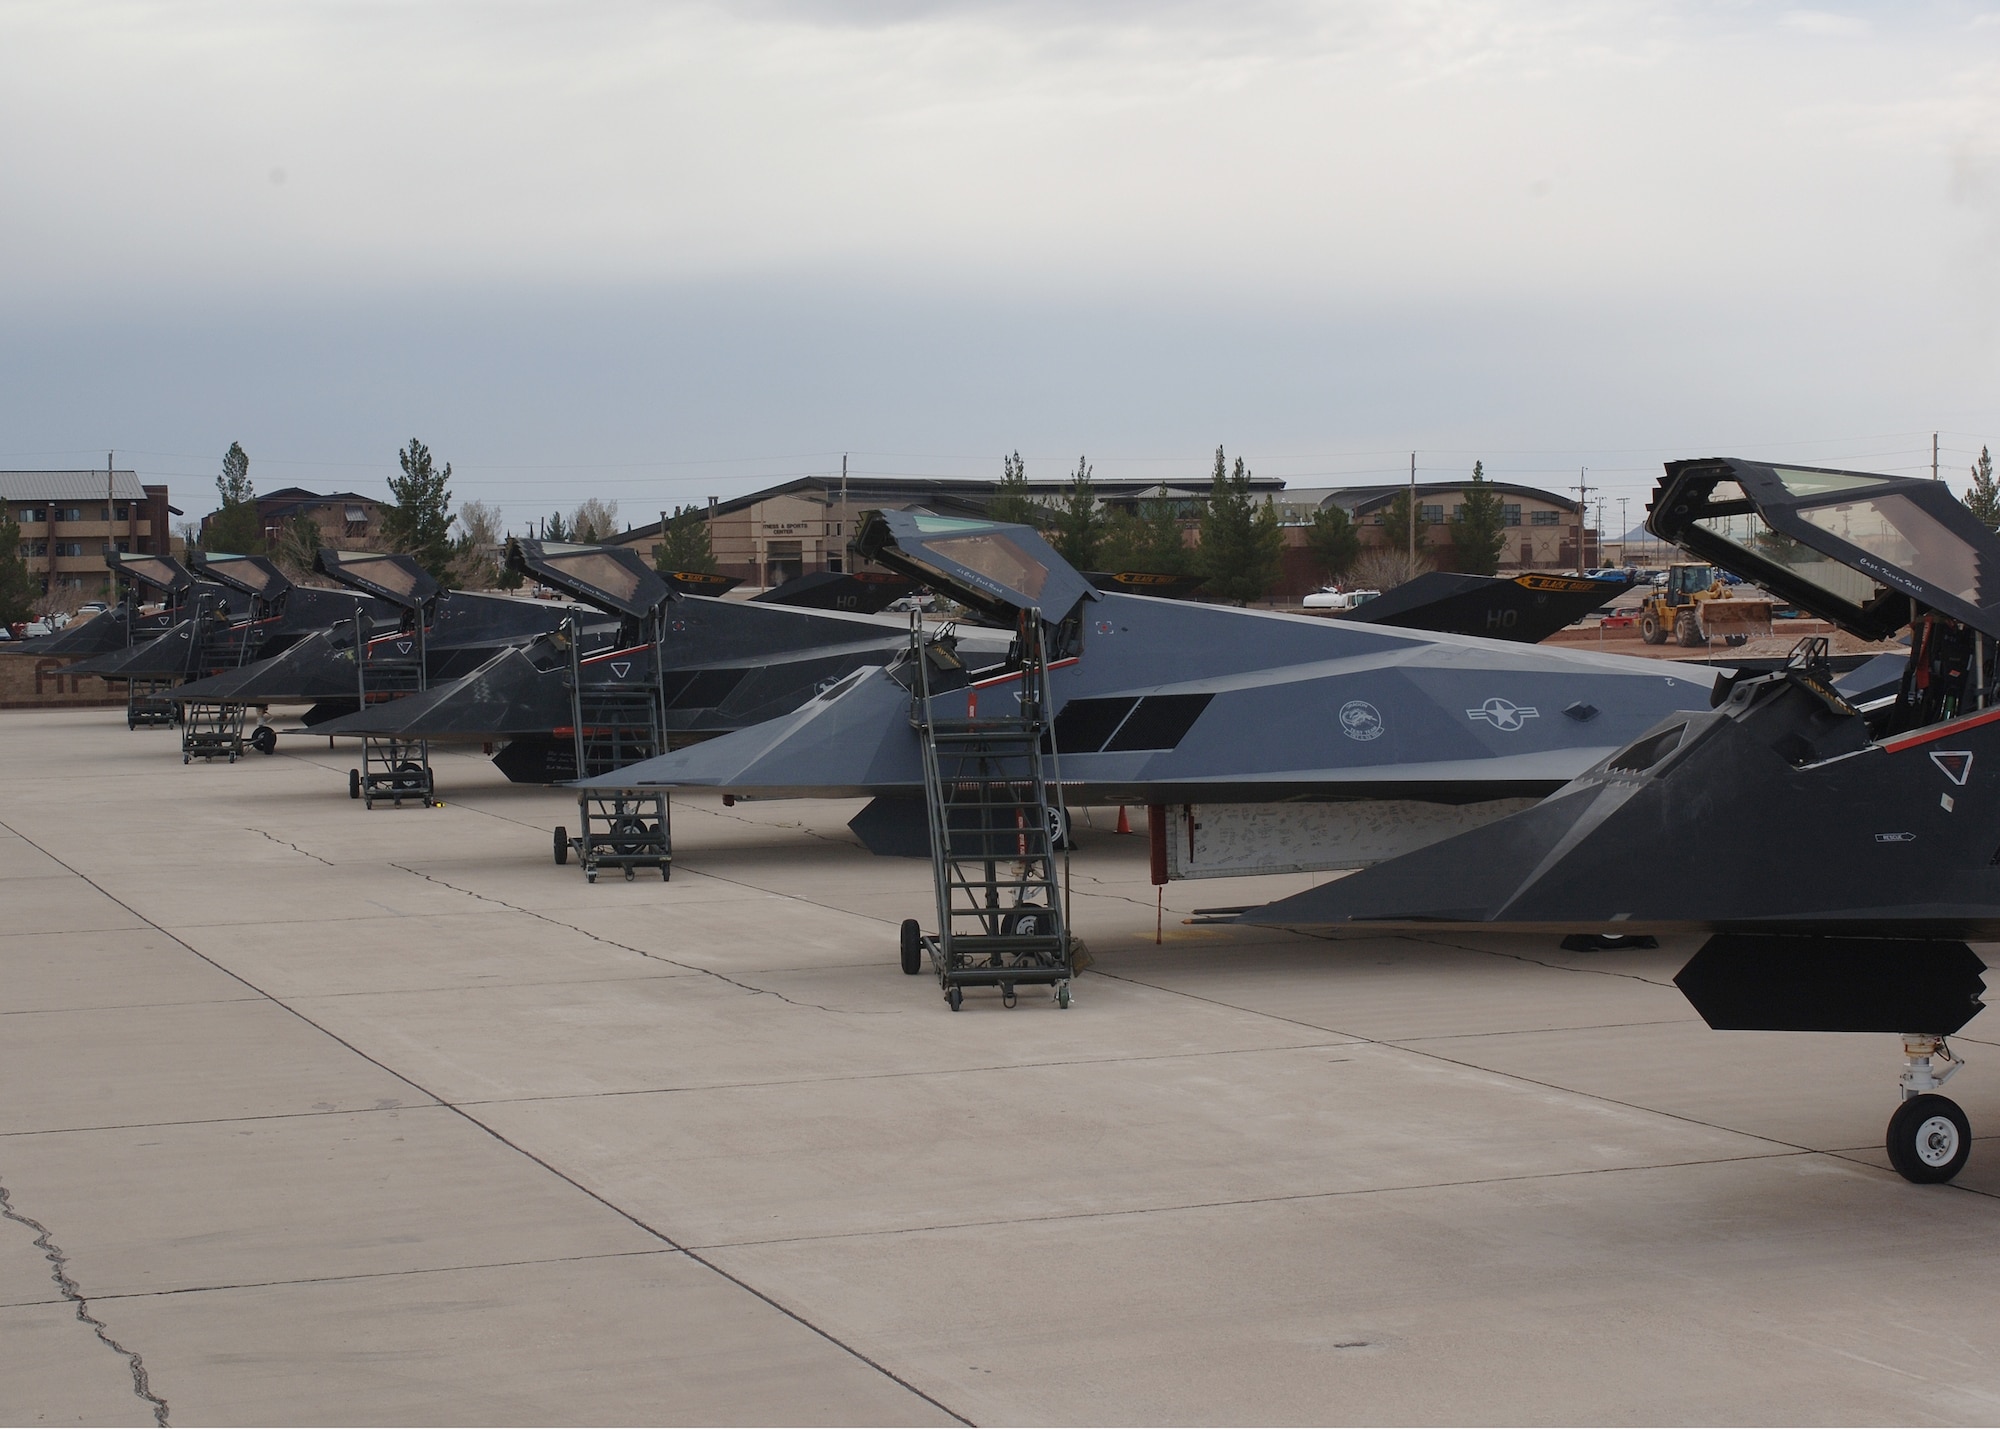 The first six F-117A Nighthawks are prepared for their final flight before taking off to Tonopah Test Range, Nev., March 12. (U.S. Air Force photo by Airman 1st Class John Strong)